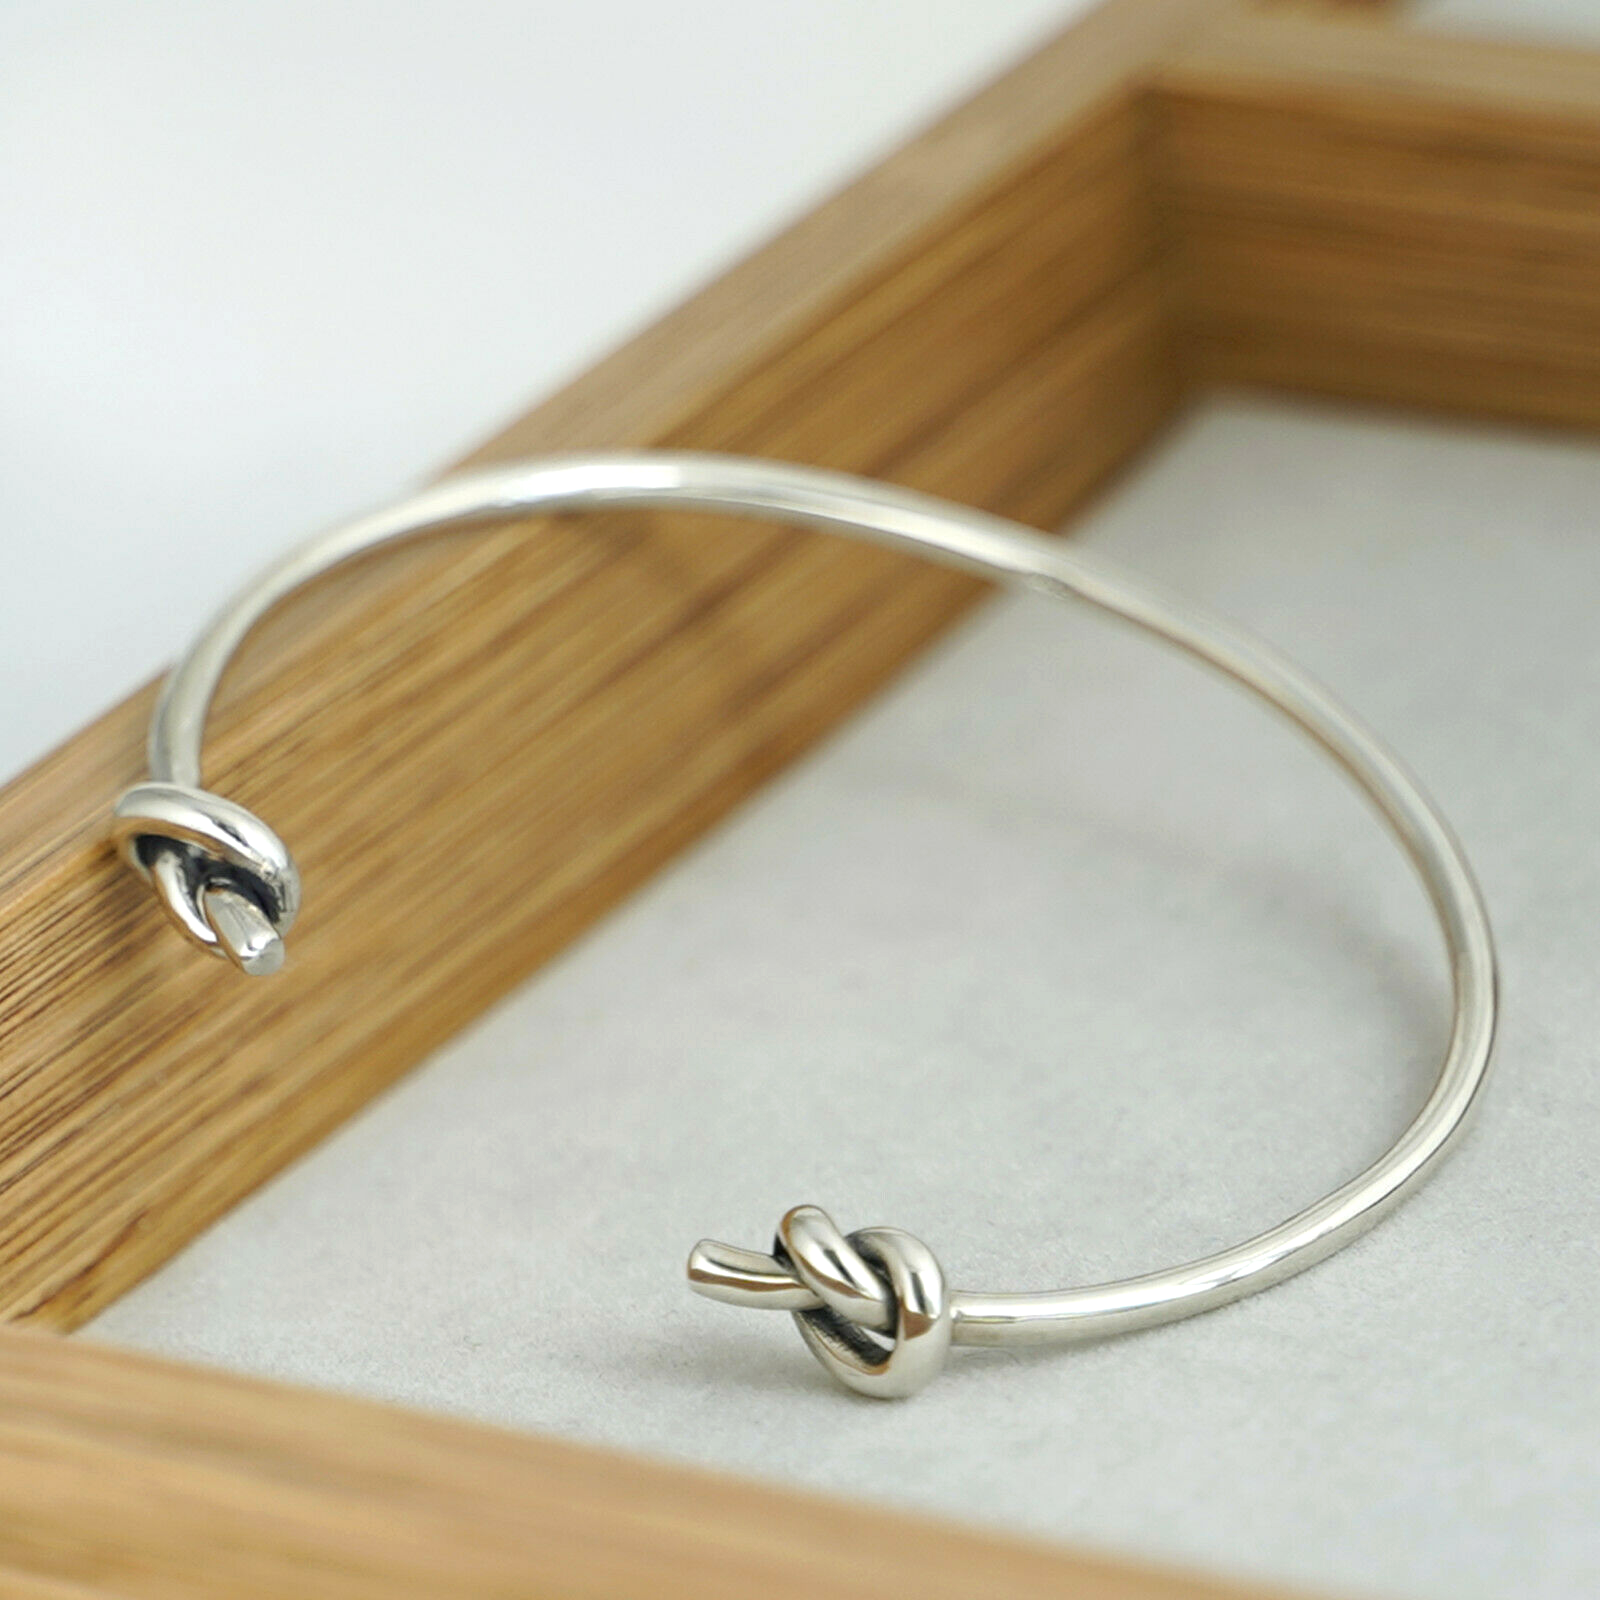 925 Sterling Silver Friendship Knot Bangle with Double Twisted Knots and Heart Design - sugarkittenlondon